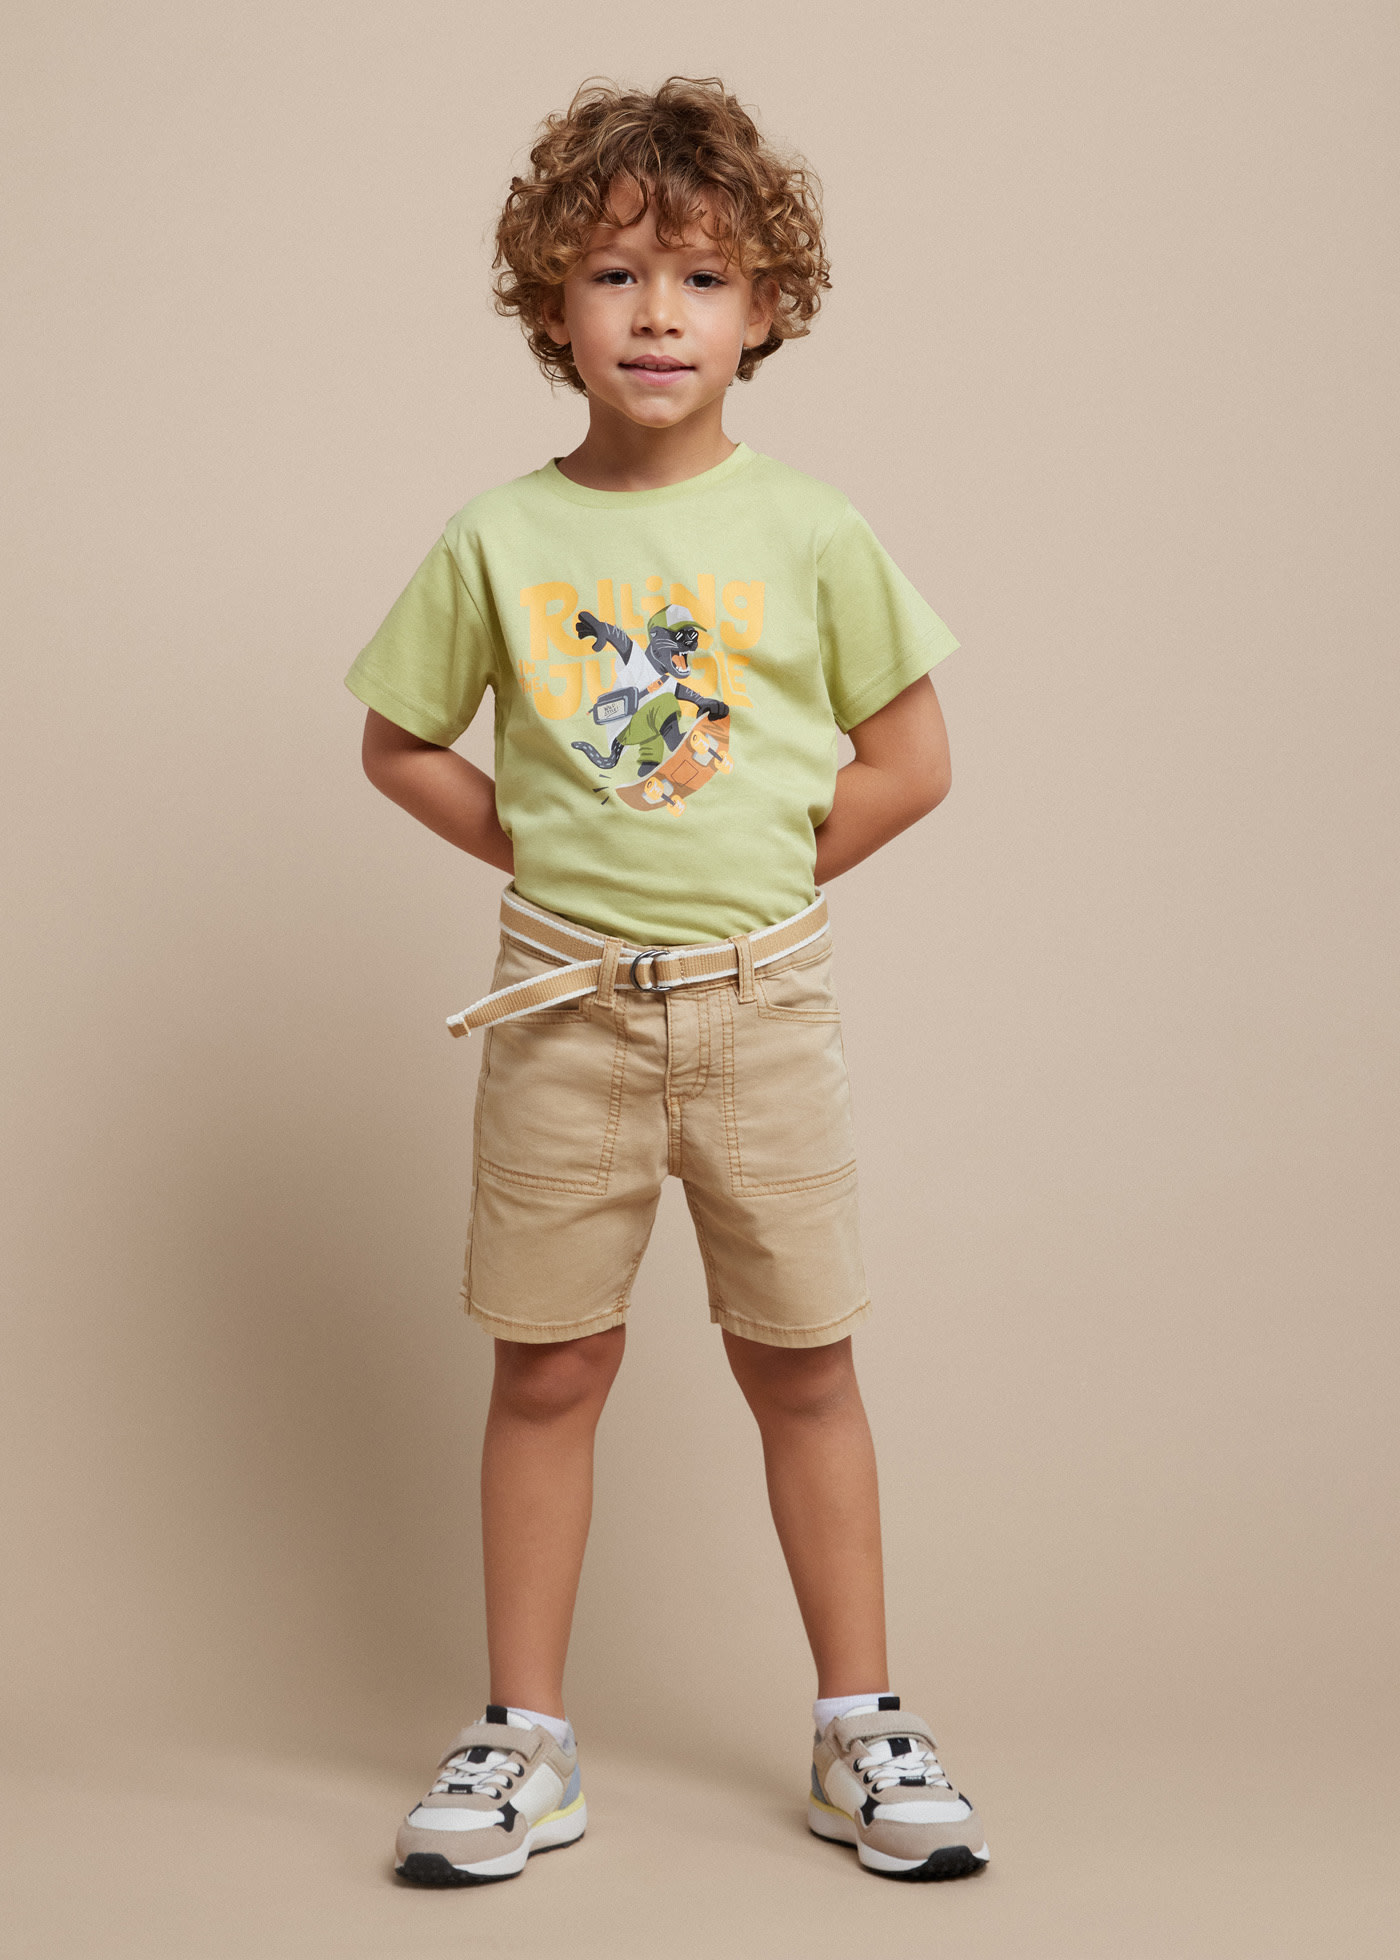 Boys belted shorts Better Cotton